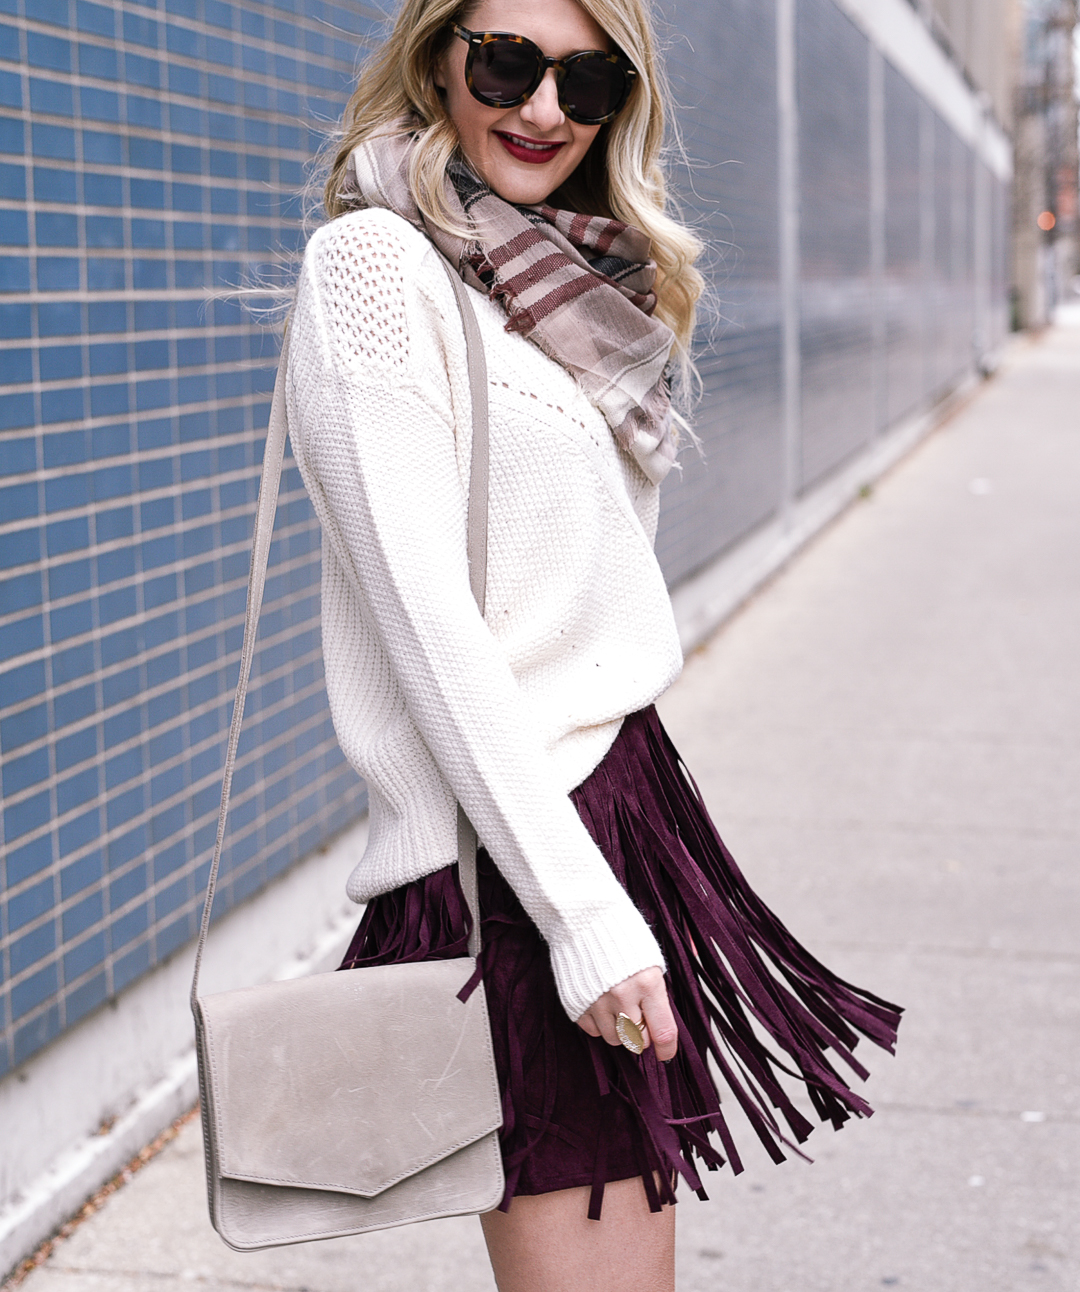 Jenna Colgrove wearing a cozy white knit sweater and a burgundy fringe mini skirt. 